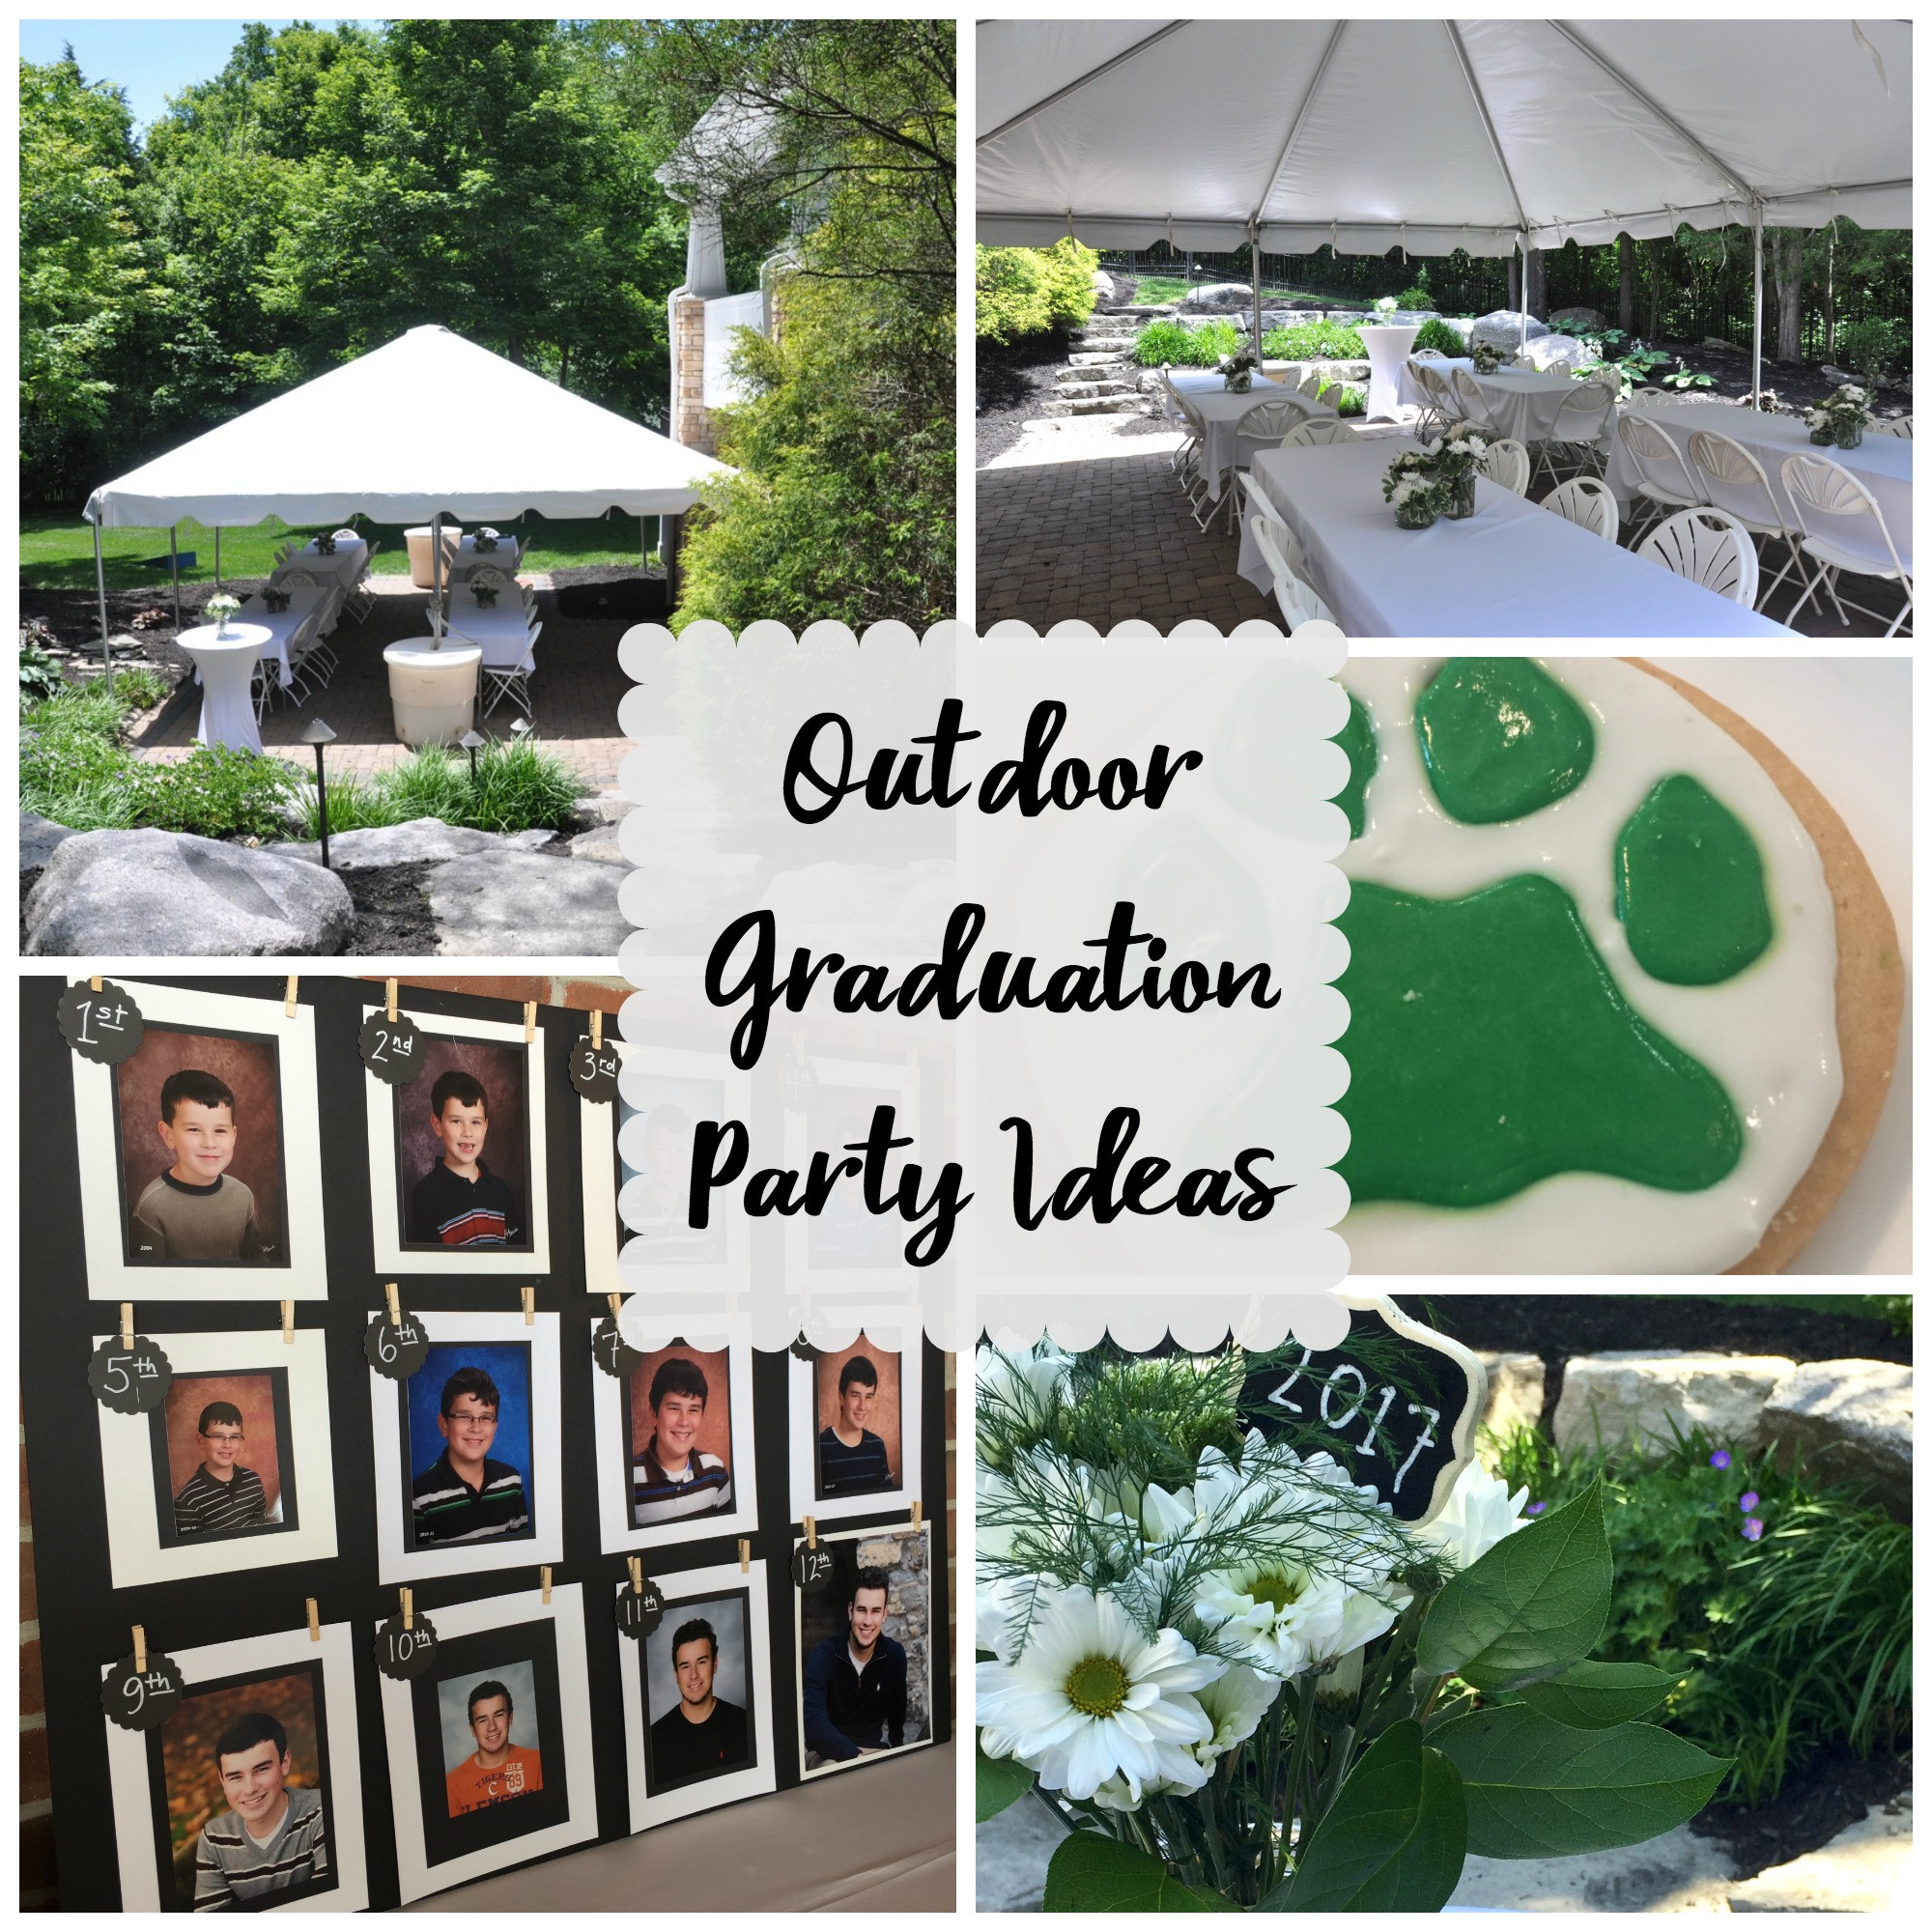 College Graduation Party Ideas 2010
 Outdoor Graduation Party Evolution of Style